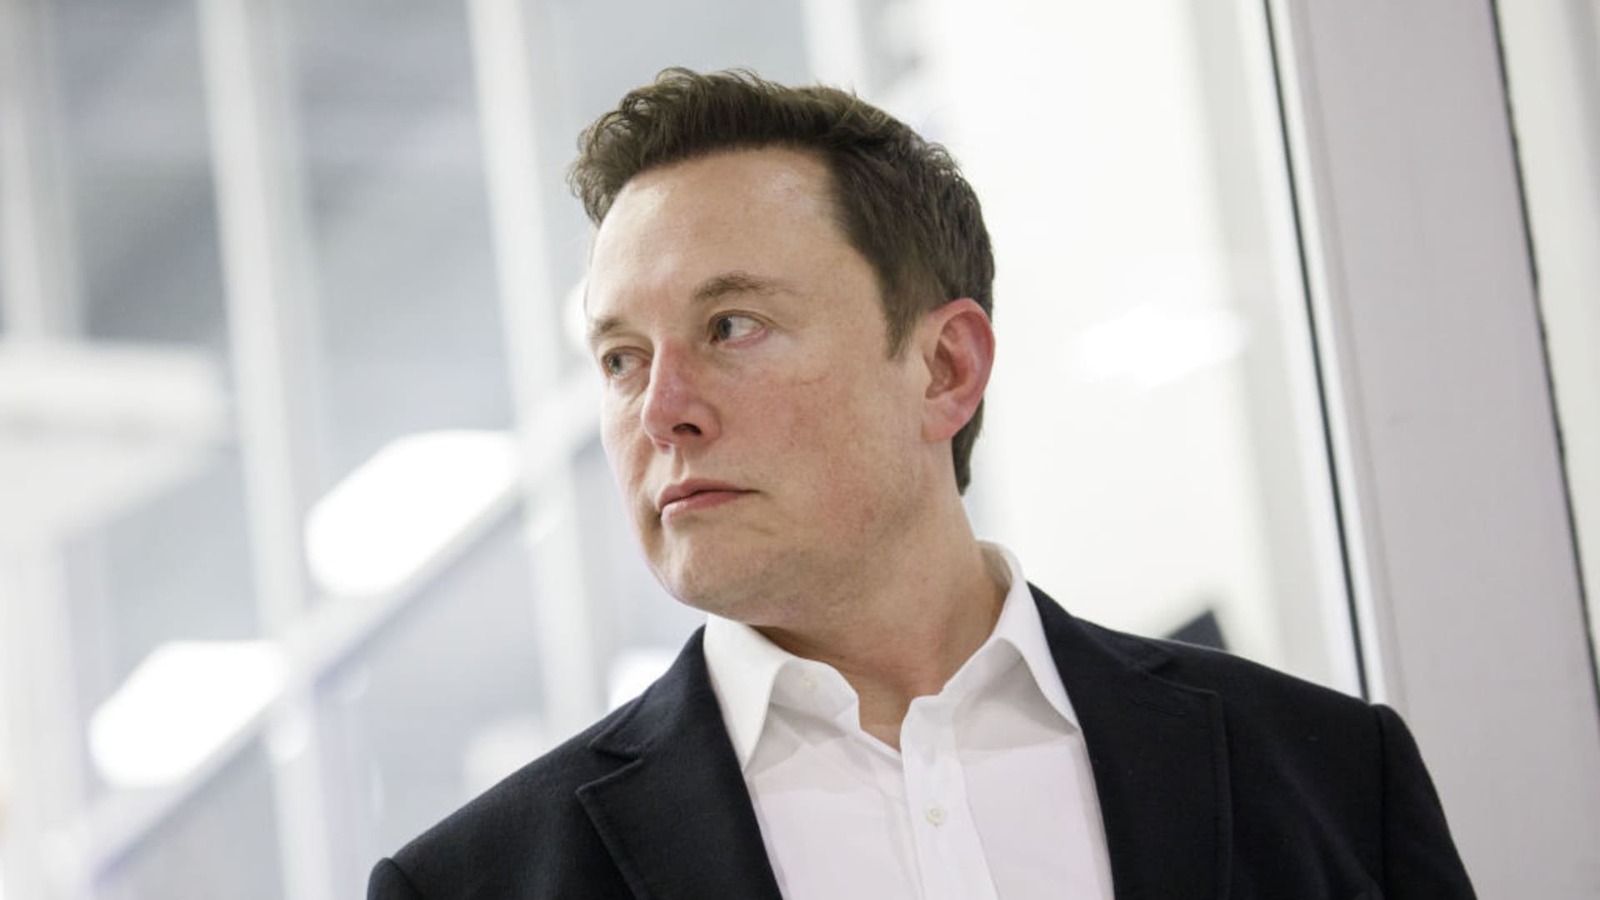 Elon Musk calls on SEC to evaluate Twitter user numbers